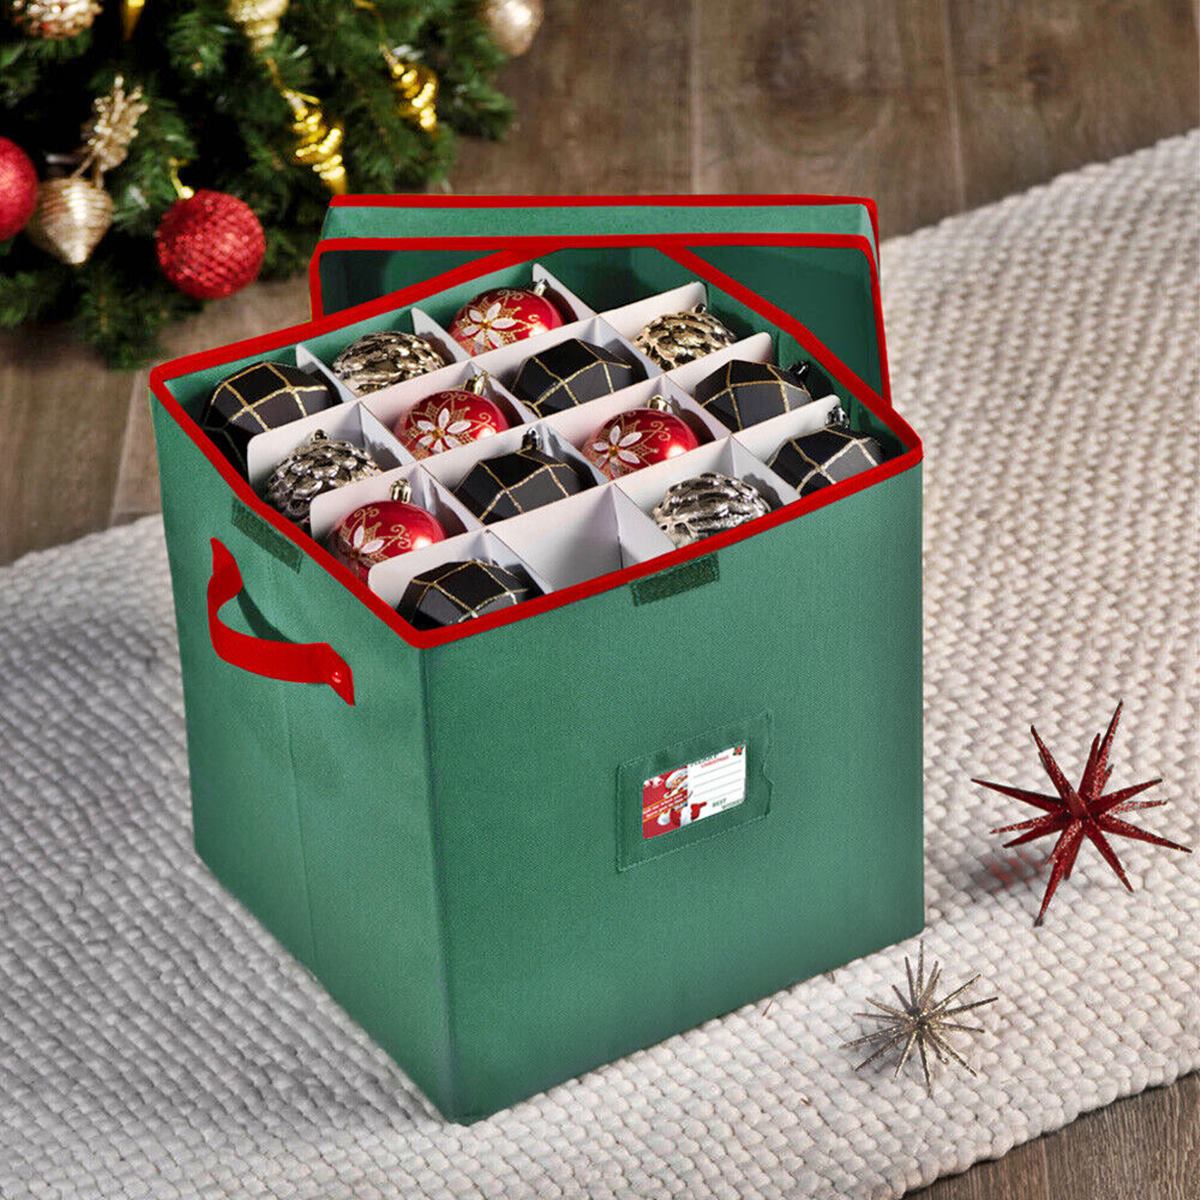 Clear Ornament Storage Box with Adjustable Dividers